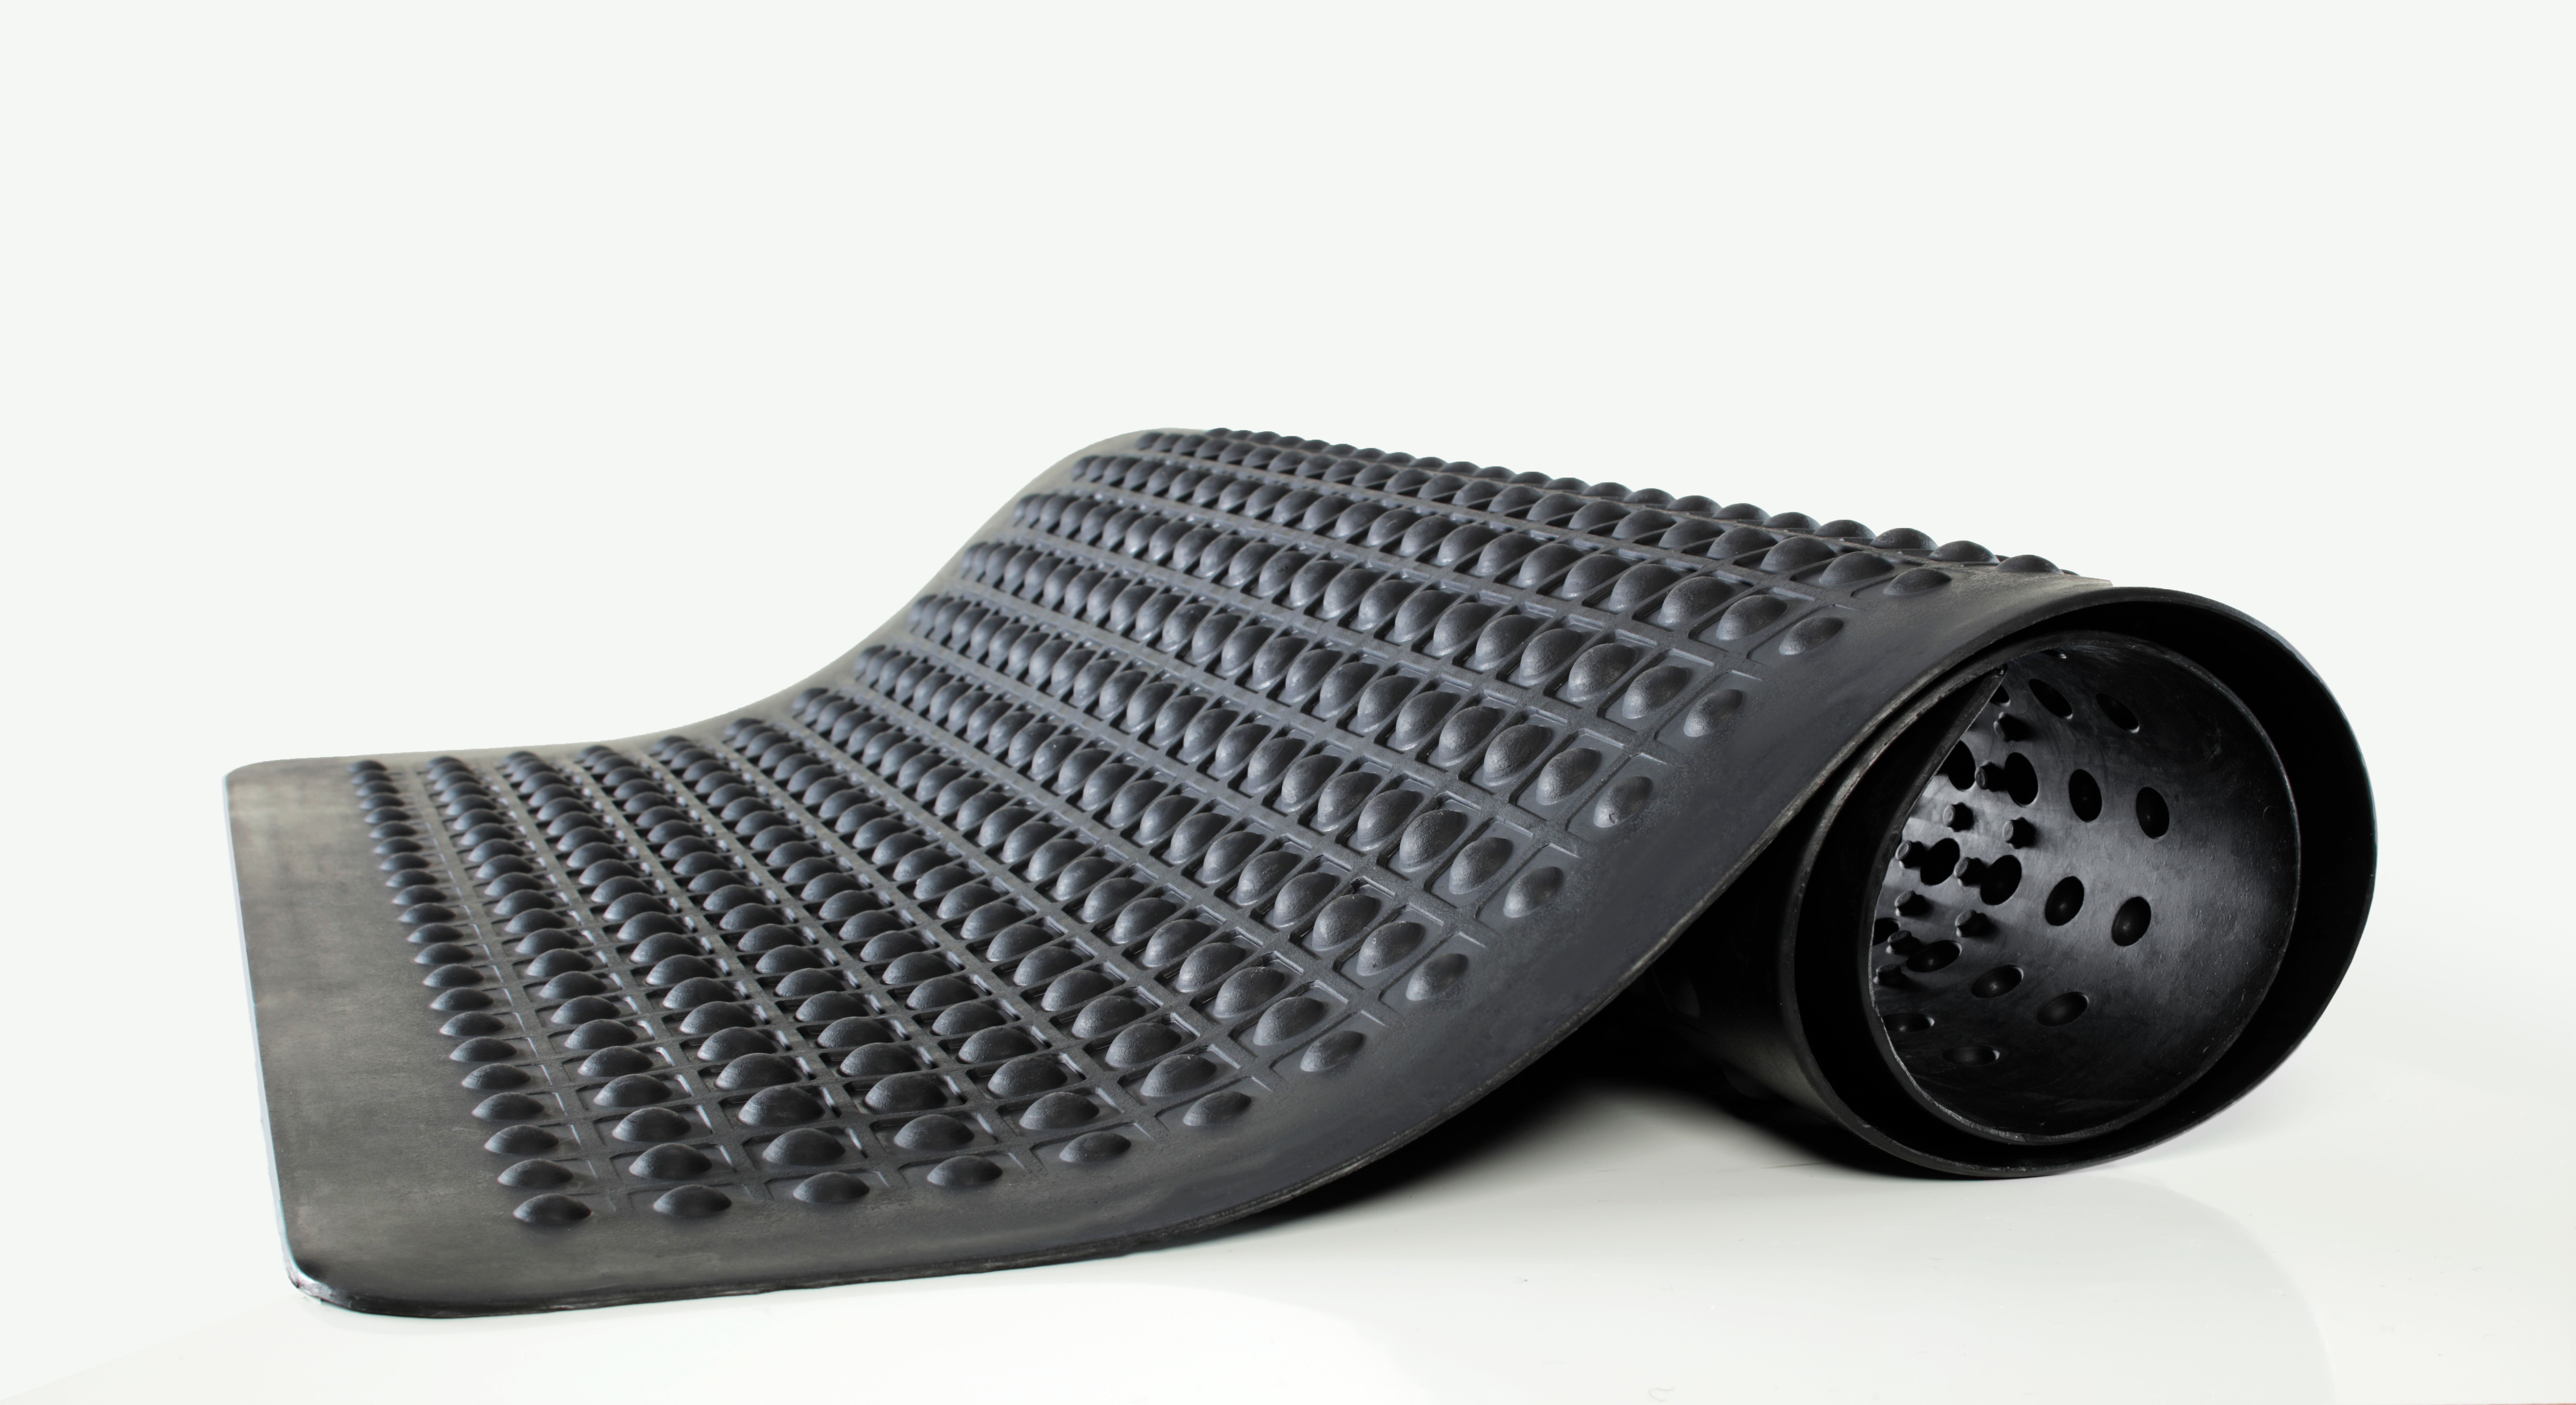 FlexStep Scaled Rubber Floor Mat for Anti Fatigue